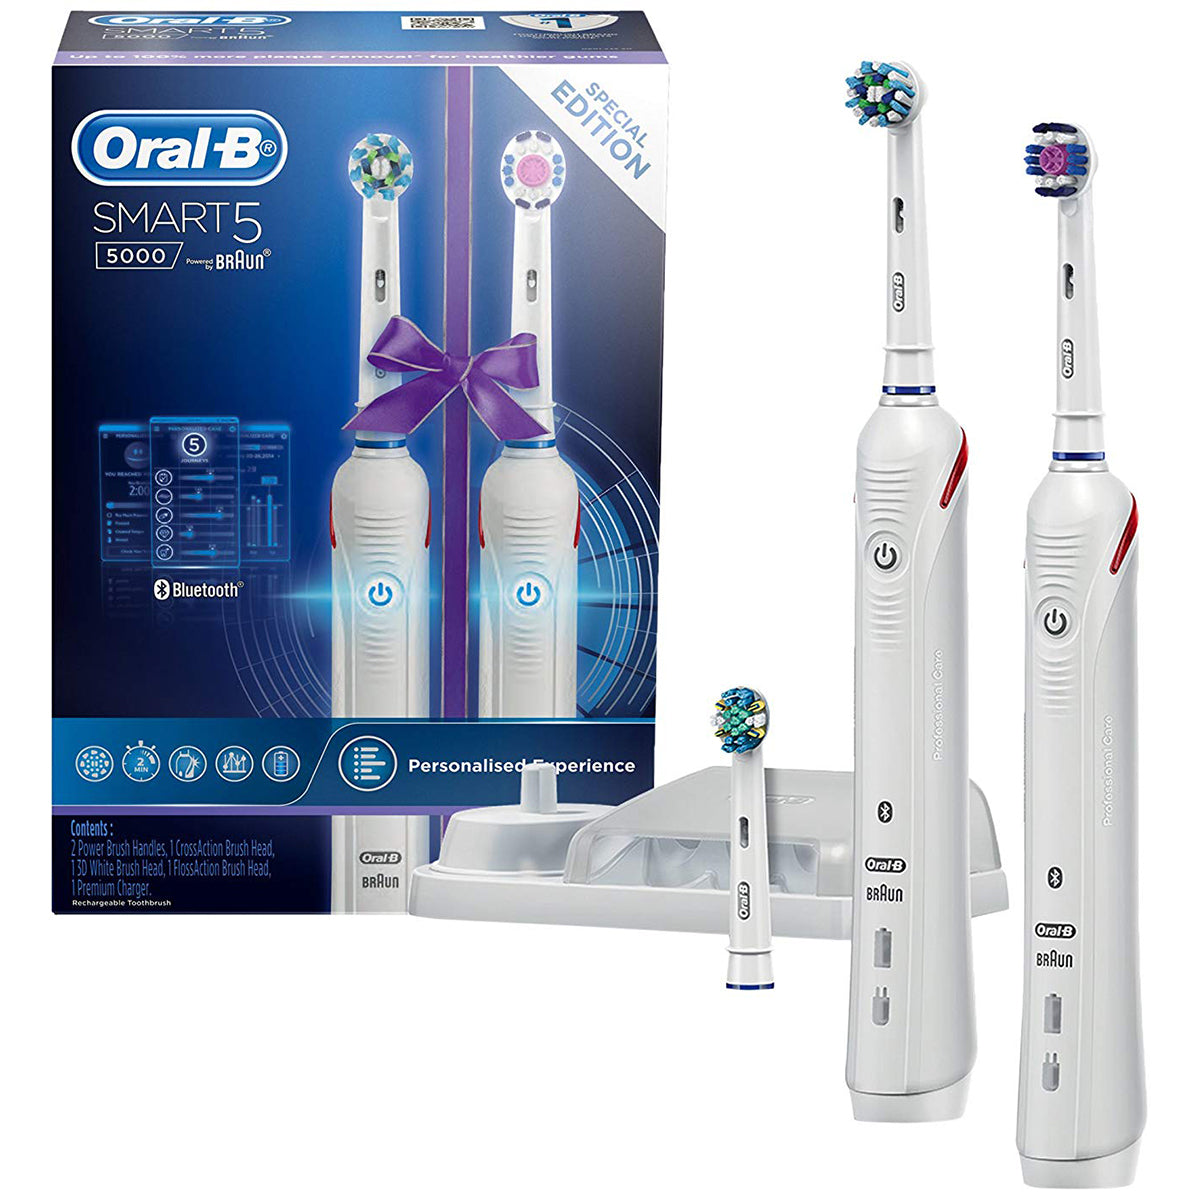 Oral-B Smart 5 5000 Electric Toothbrush Dual Handle